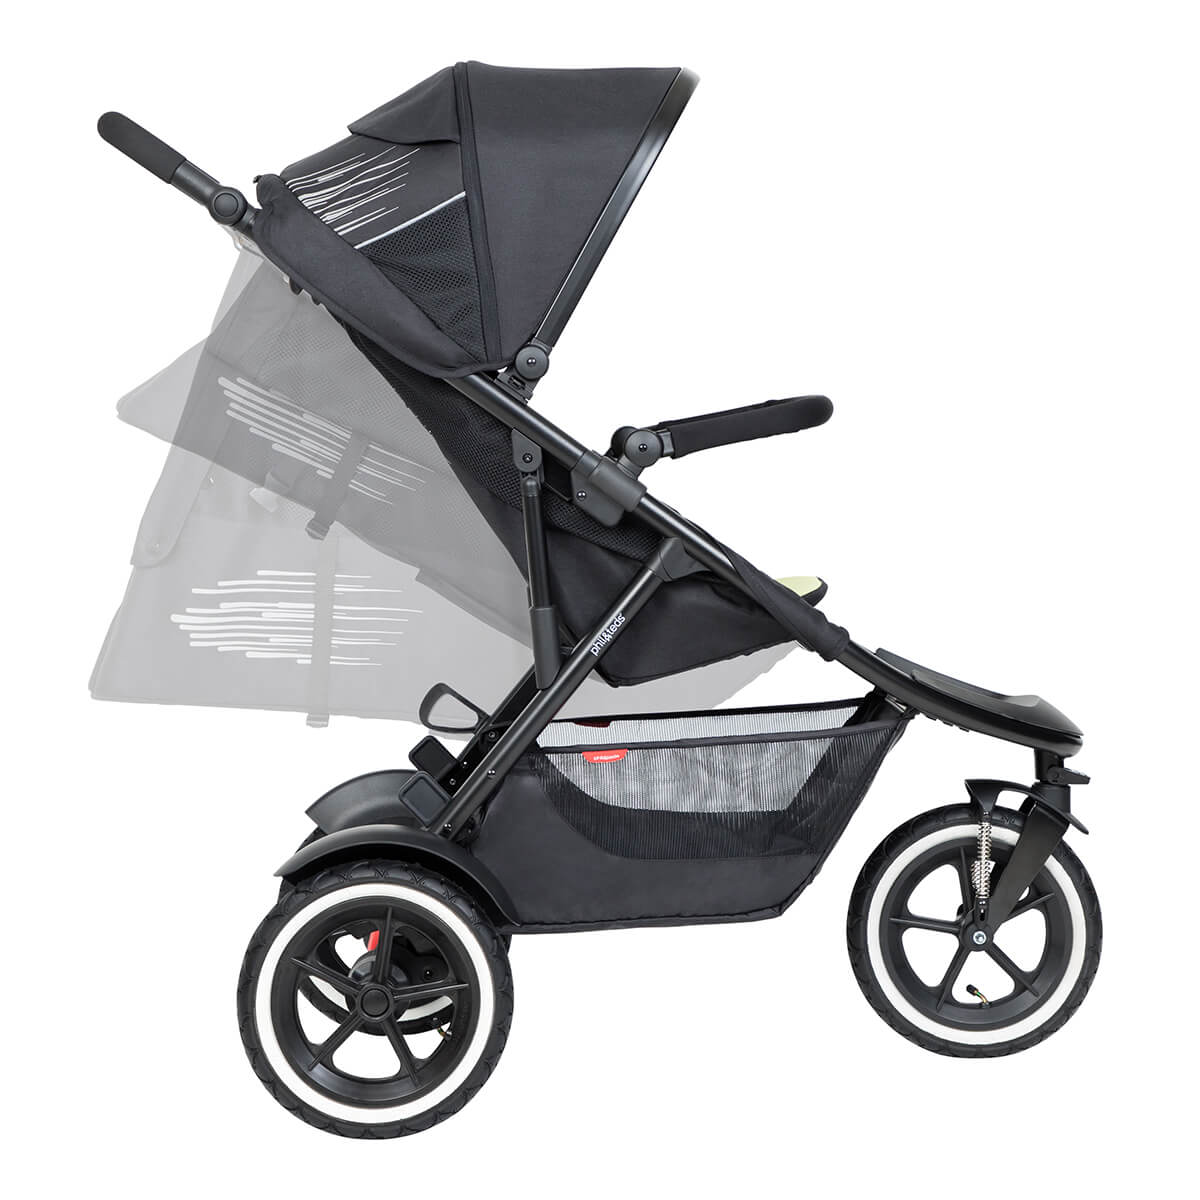 https://cdn.accentuate.io/8582363054419/19272668184664/philteds-sport-buggy-can-recline-in-multiple-angles-including-full-recline-for-newborn-baby-v1700698188376.jpg?1200x1200